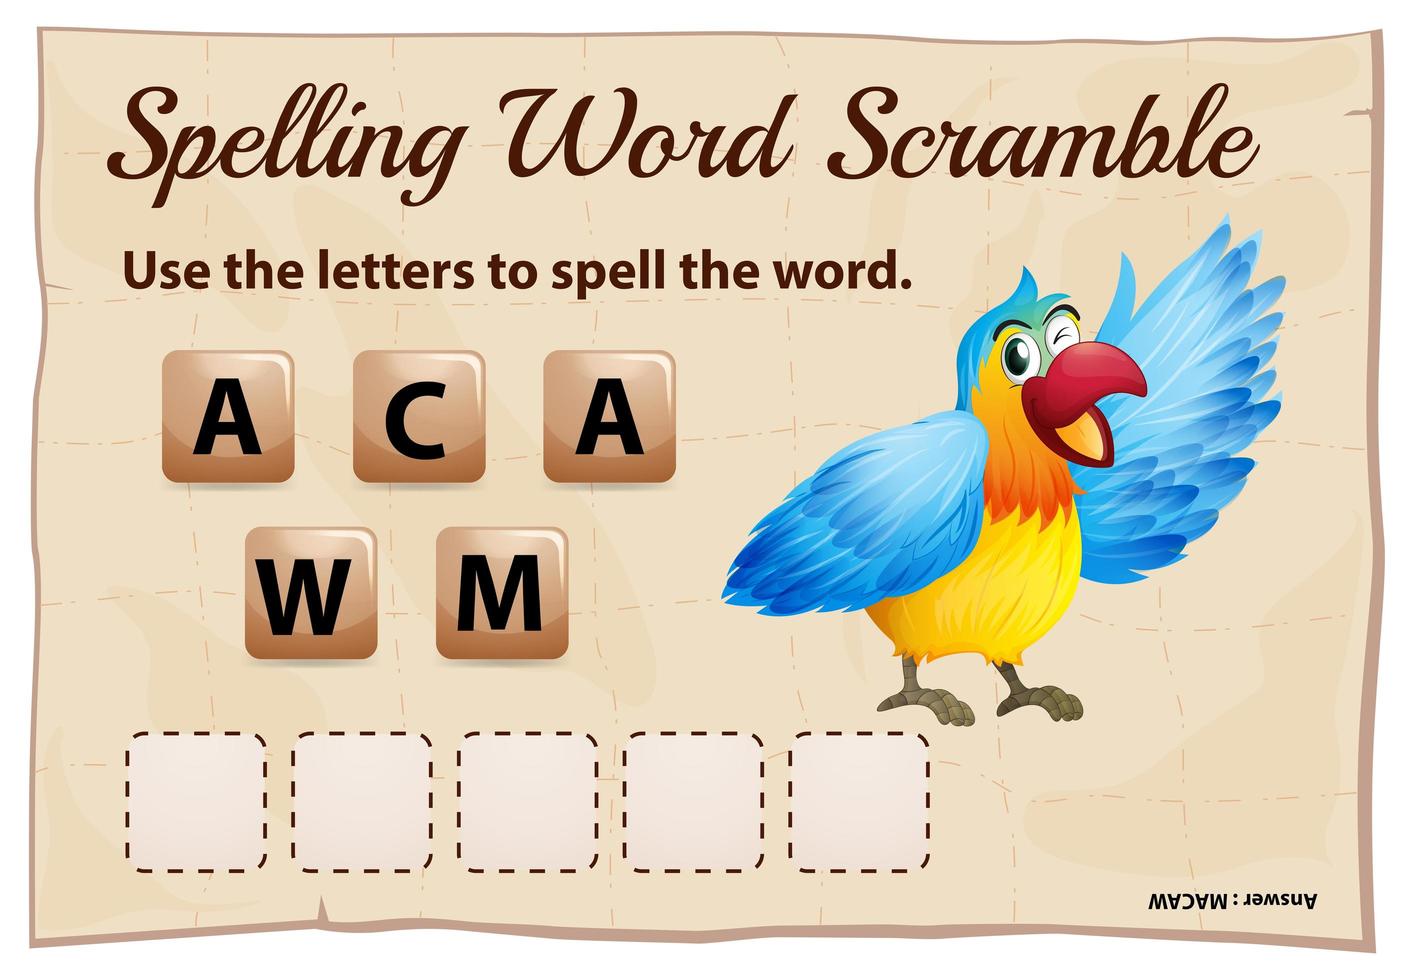 Spelling word scramble game with macaw  vector